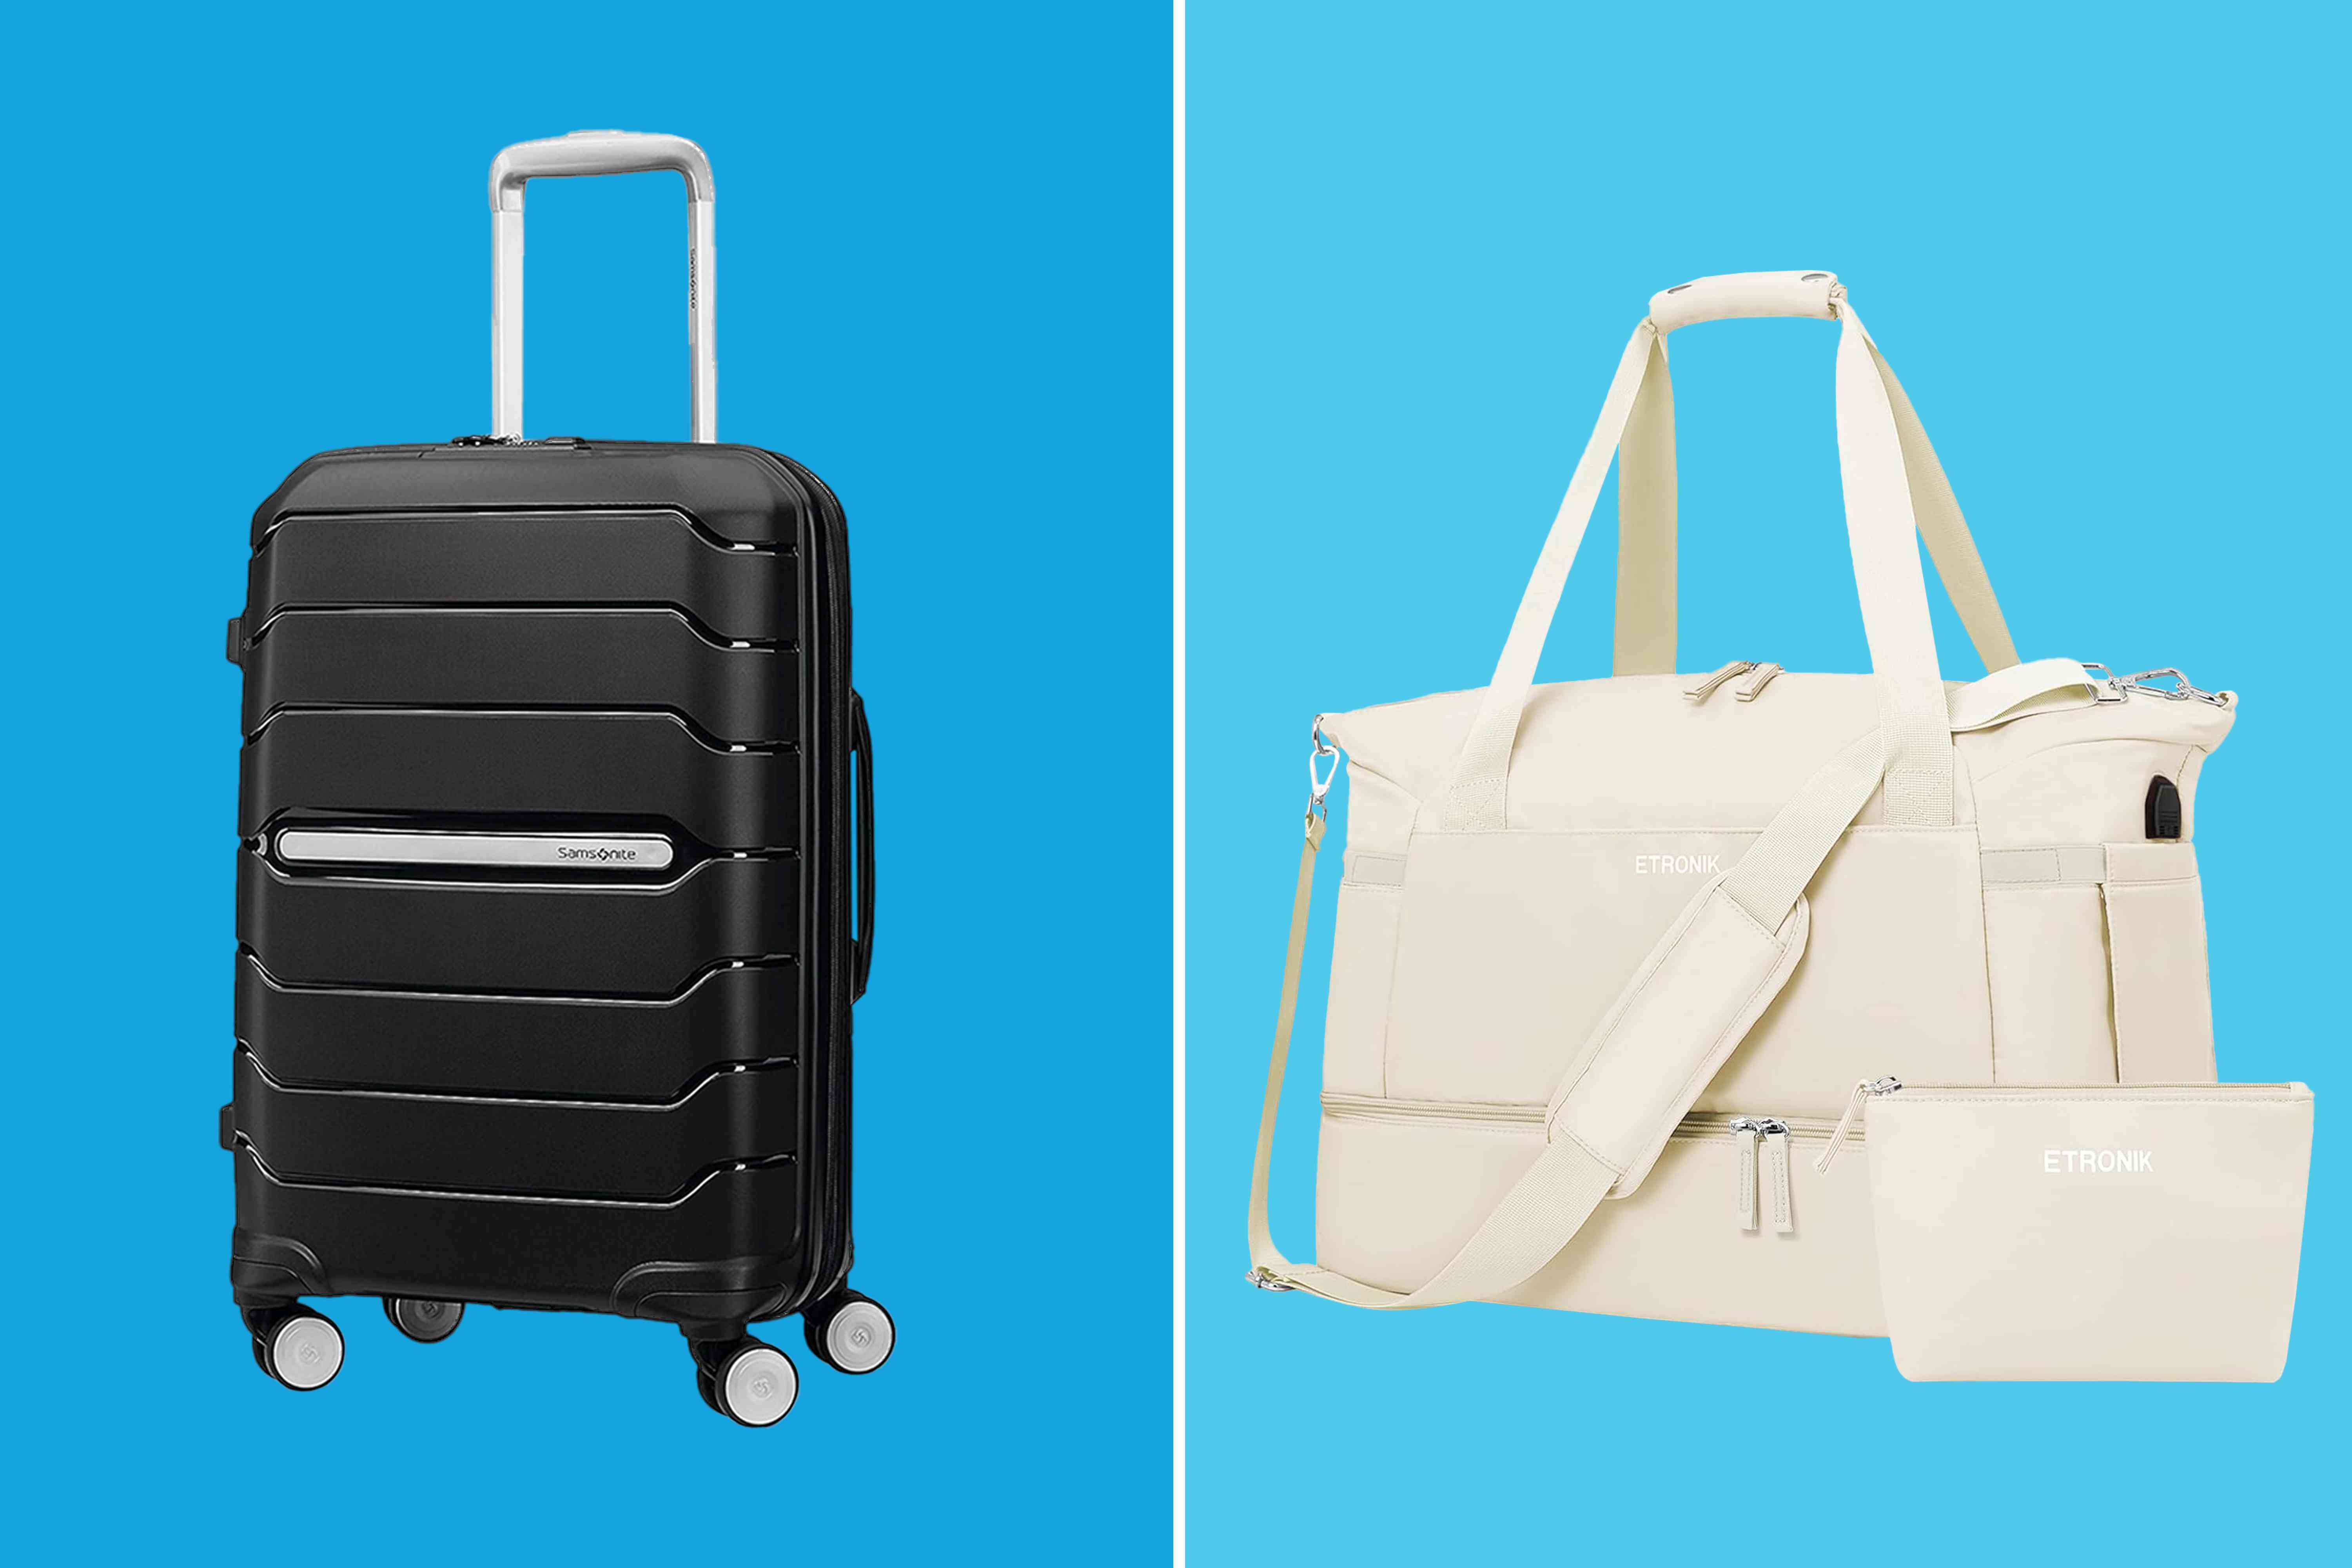 Luggage from Samsonite, Tumi, Vera Bradley, and More Is Secretly on Sale at Amazon — Up to 54% Off